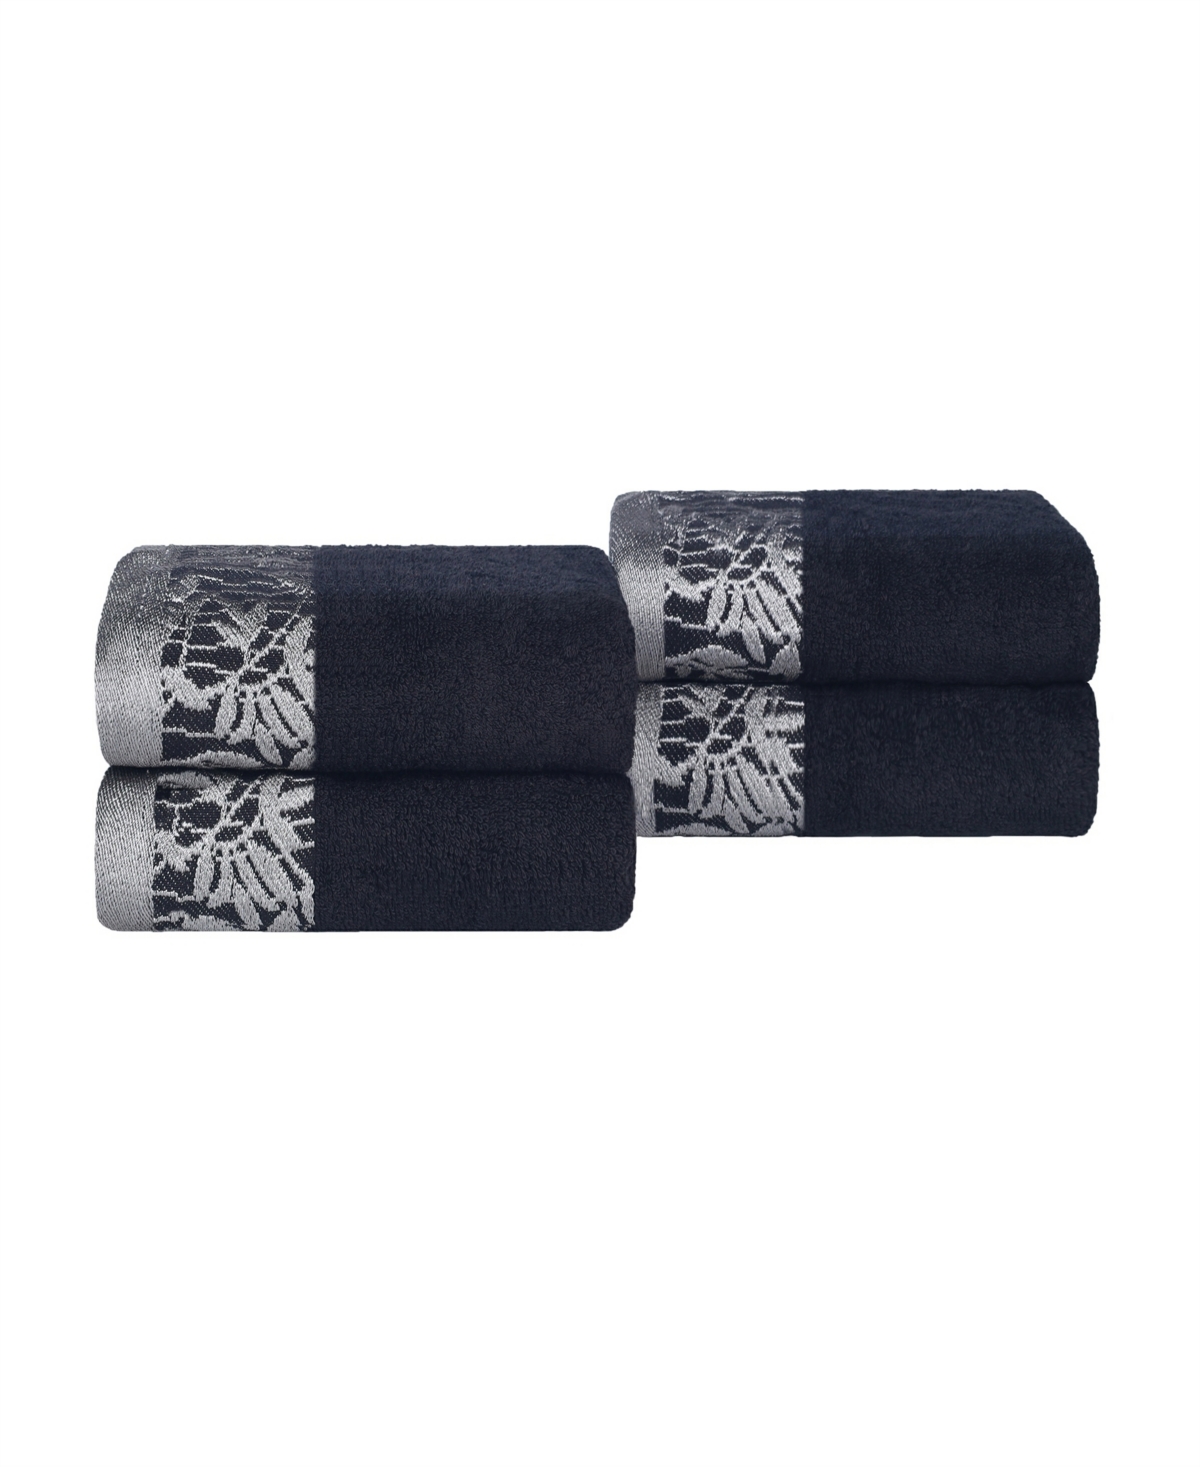 Superior Wisteria Floral Embroidered Jacquard Border Cotton Hand Towel Set, 4 Pieces In Black